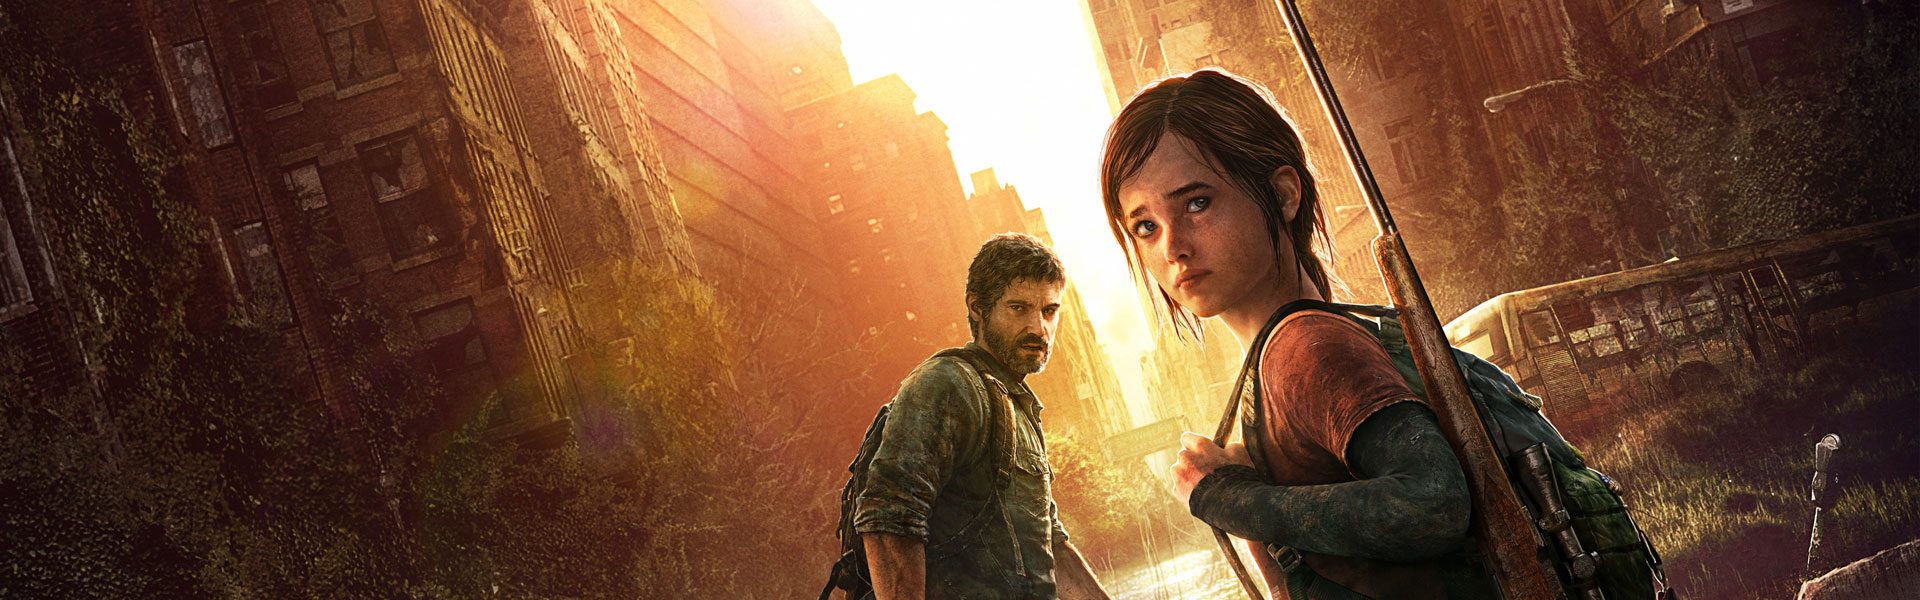 last of us ps4 store